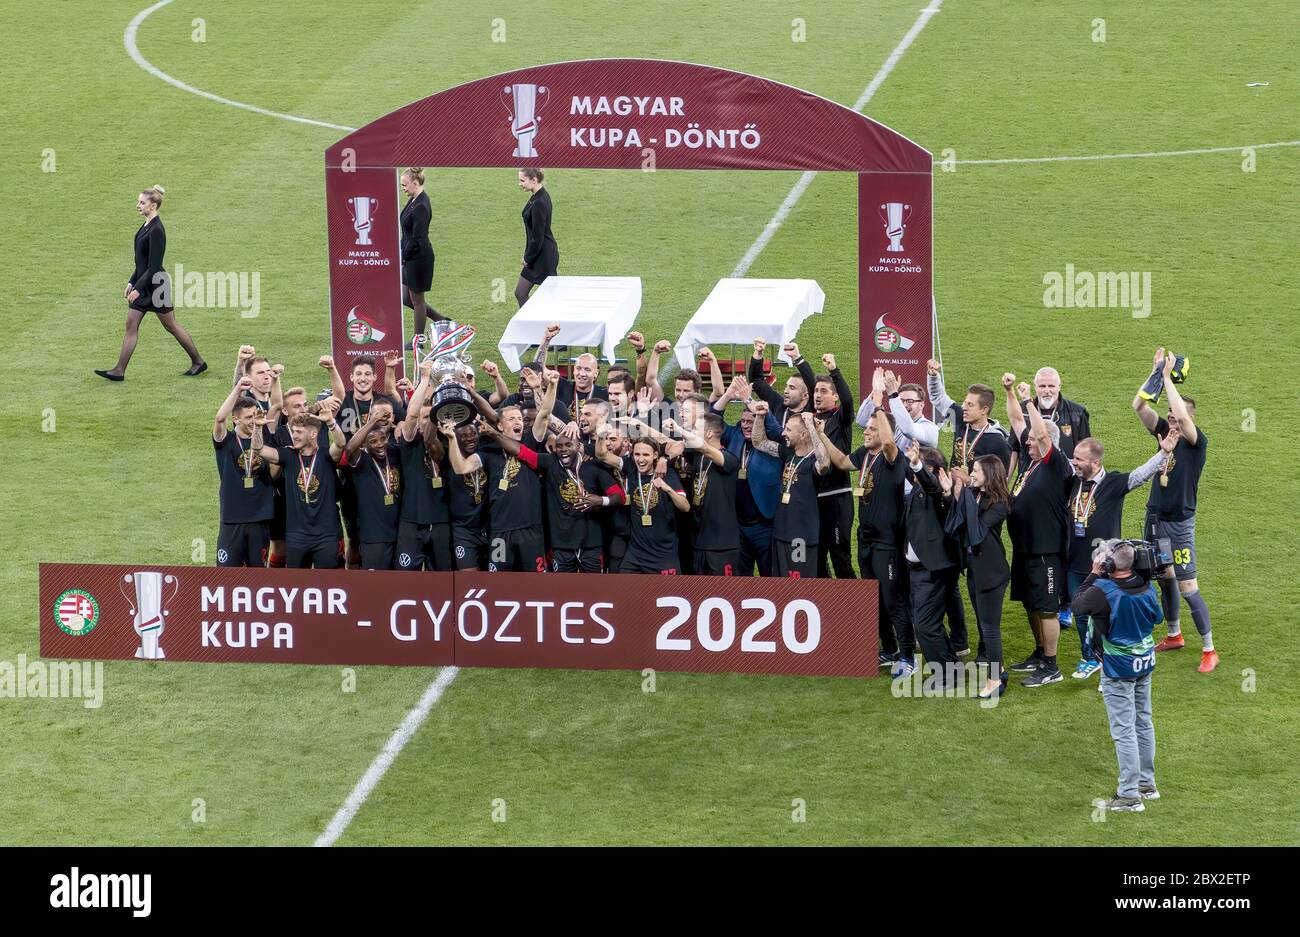 BUDAPEST, HUNGARY - JUNE 3: The cup winner team Budapest Honved celebrate  during the Hungarian Cup Final